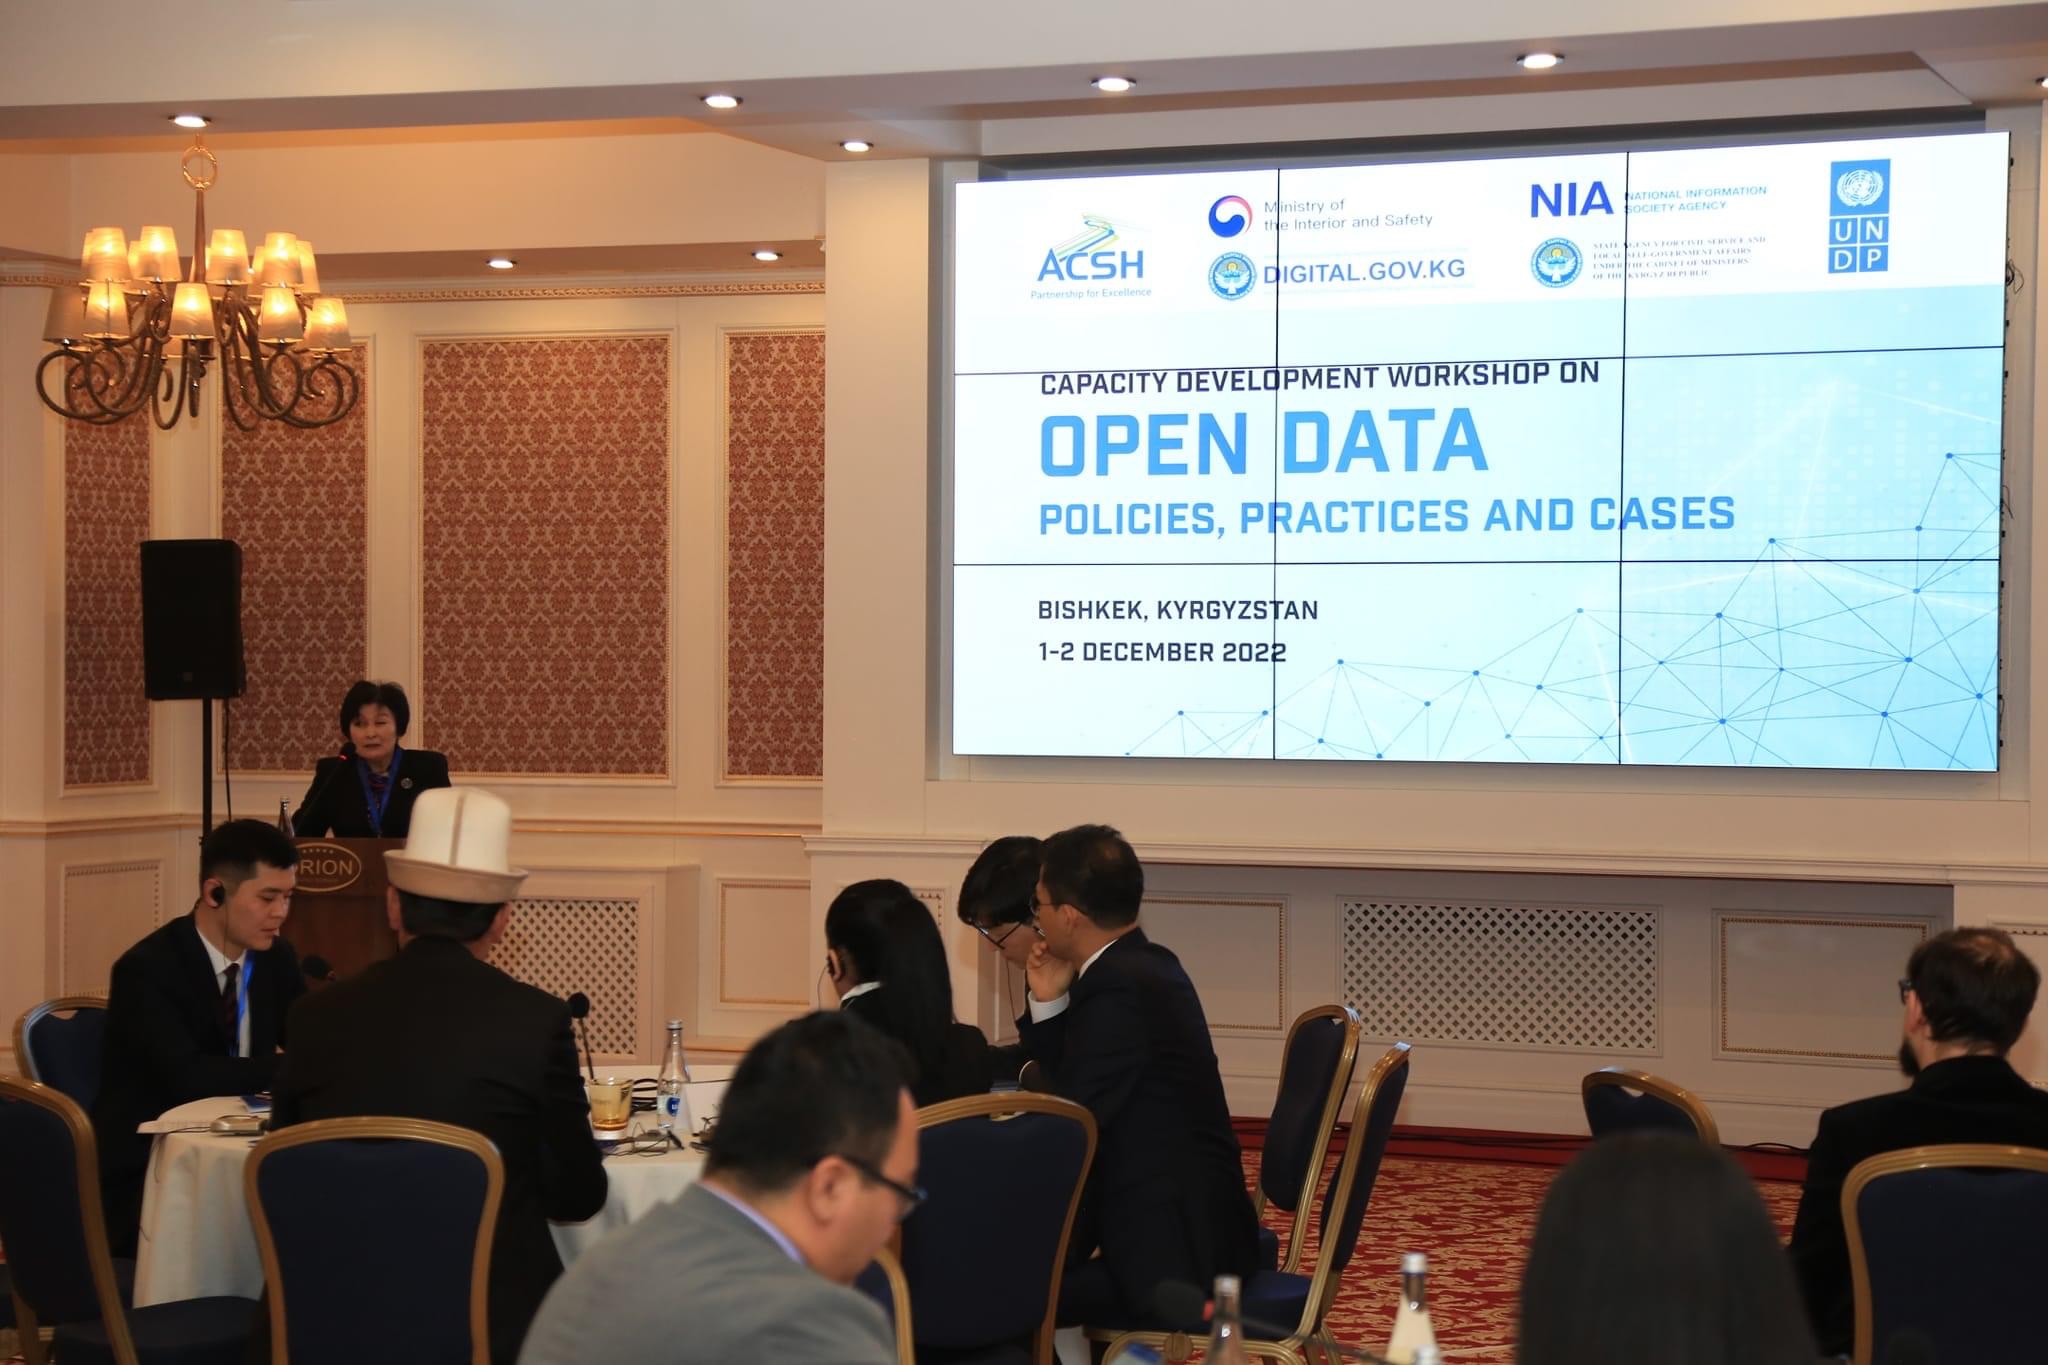 Best Practices in opendata policy frameworks and successful cases were presented by International Experts of the Republic of Korea and KPMG Baltics to Civil Servants of Central Asia and the Caucasus